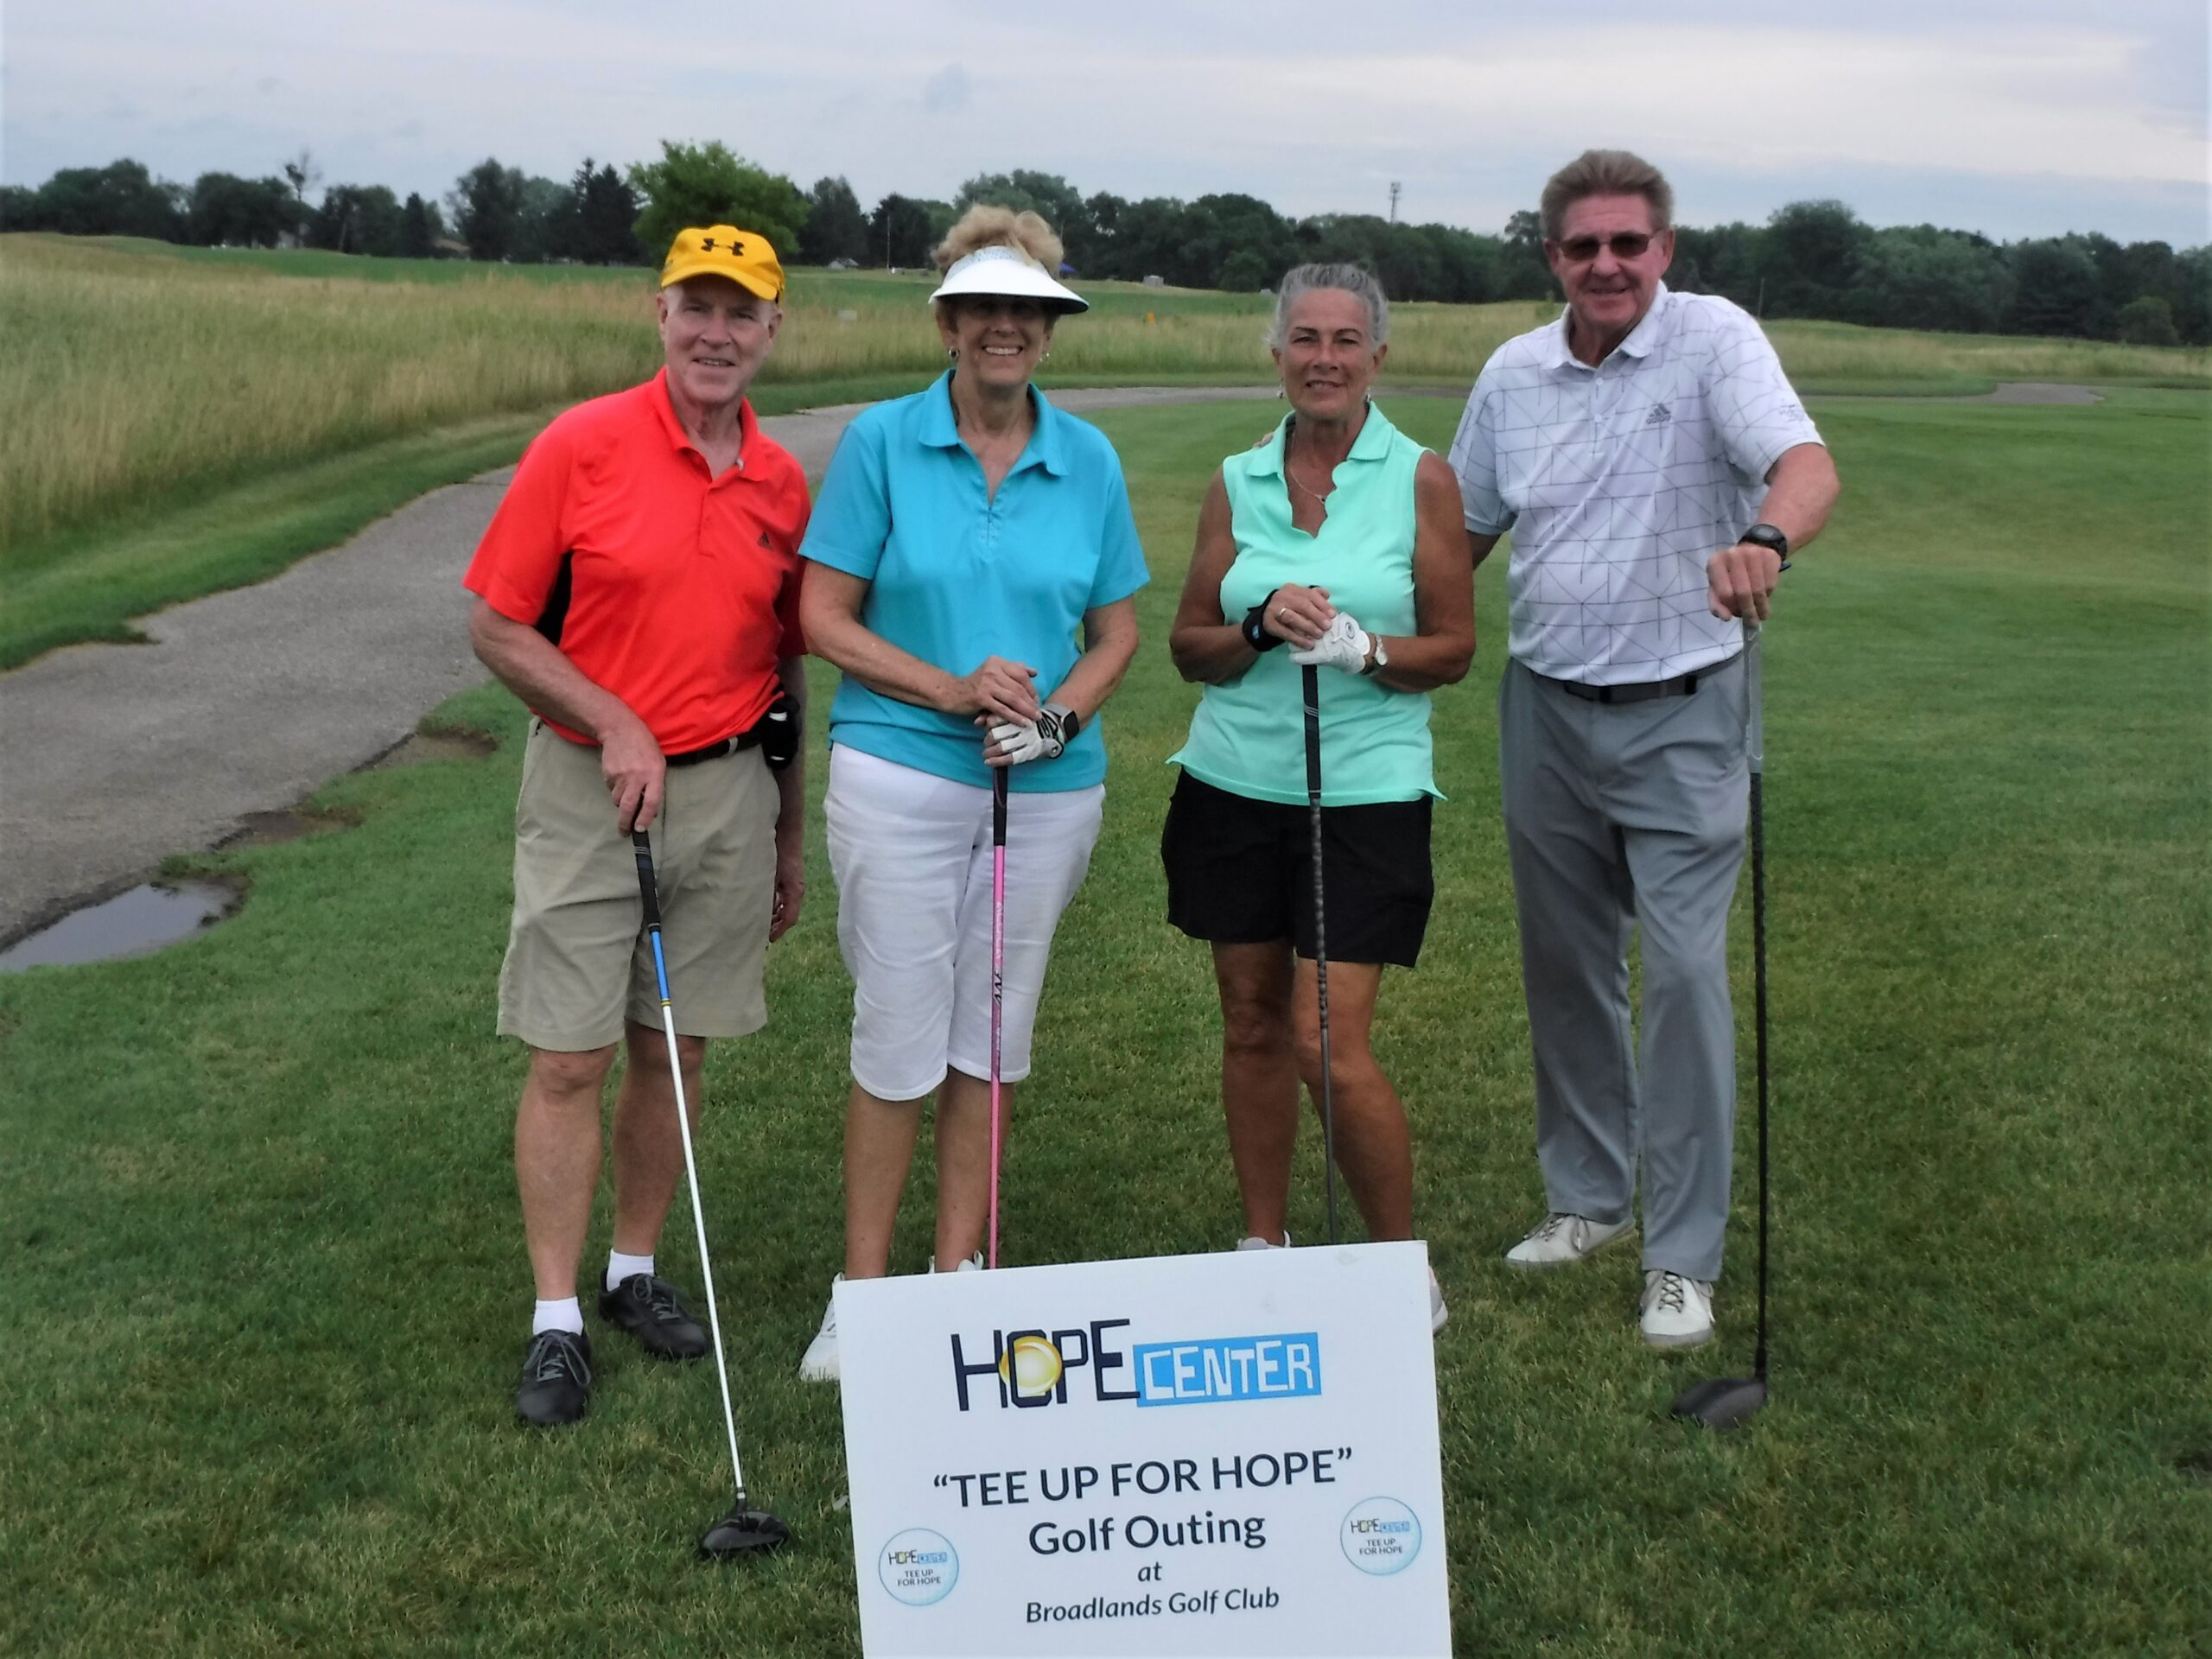 Thank you for attending the 2022 TEE UP FOR HOPE Golf Outing!